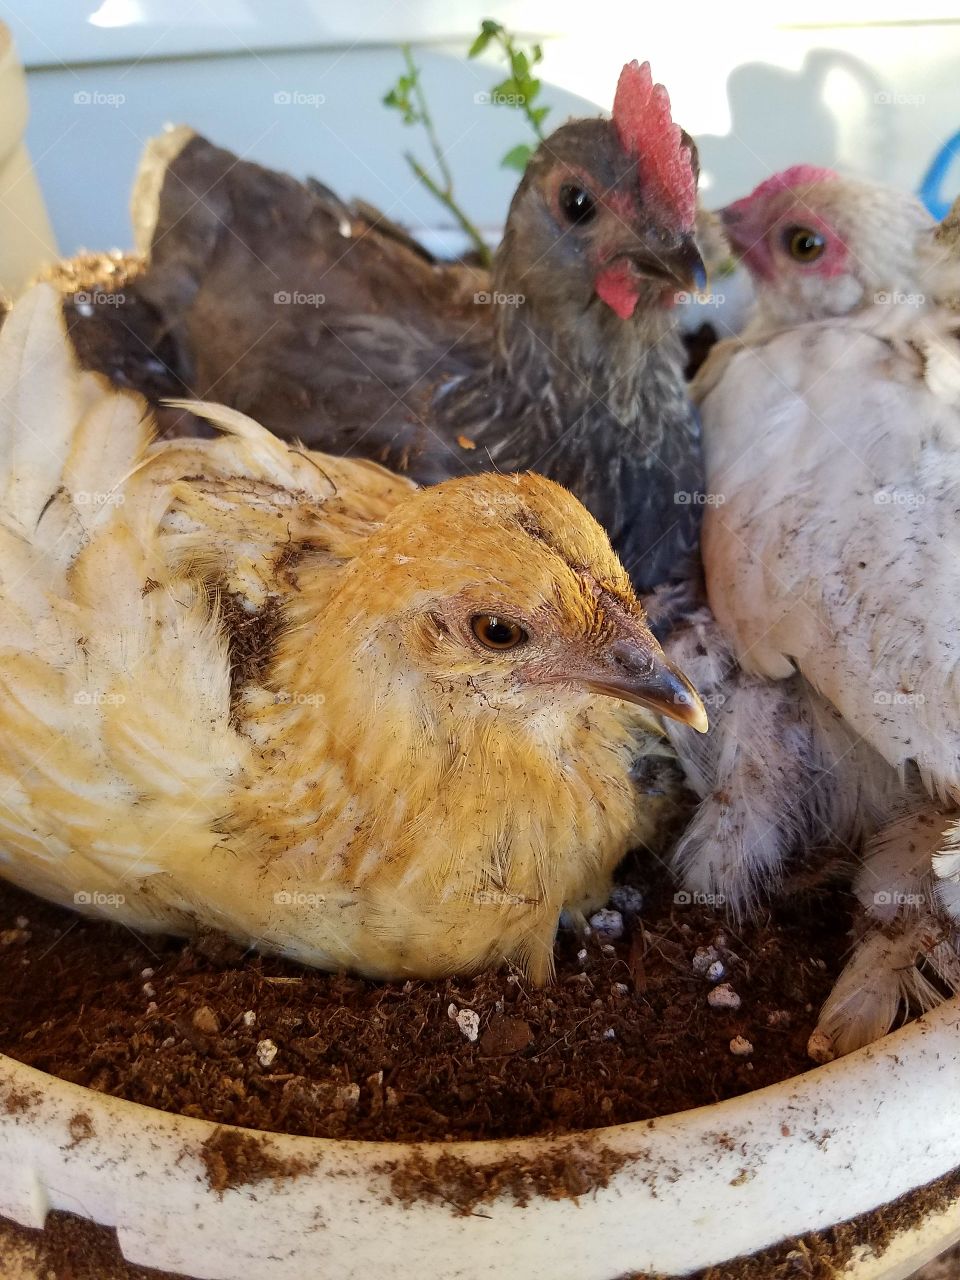 My planted chickens!